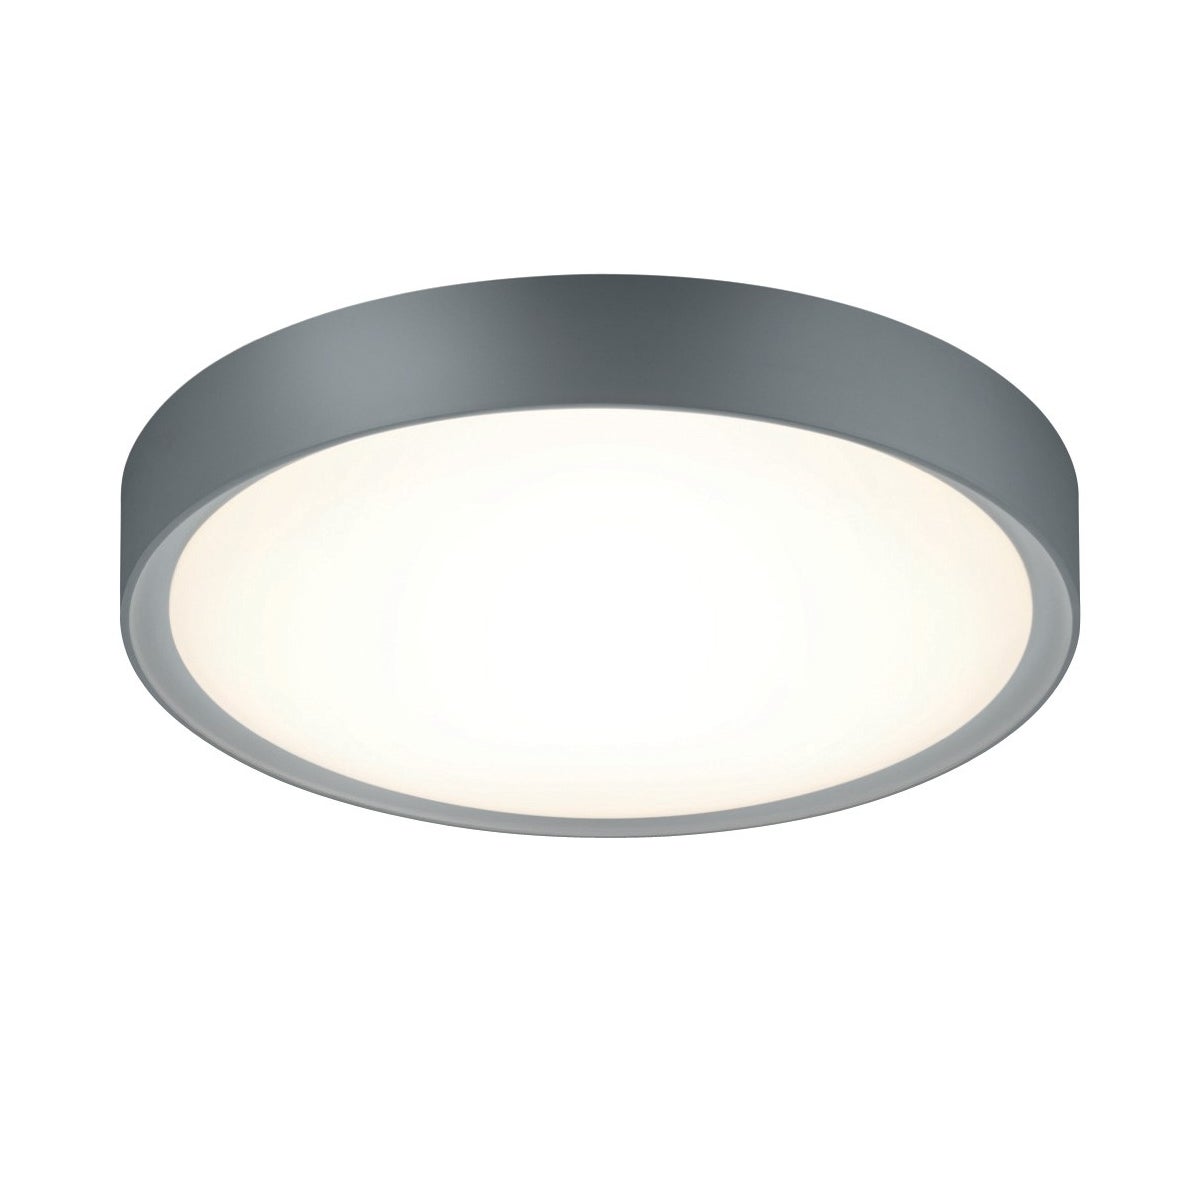 Clarimo Ceiling Mount in Light Gray